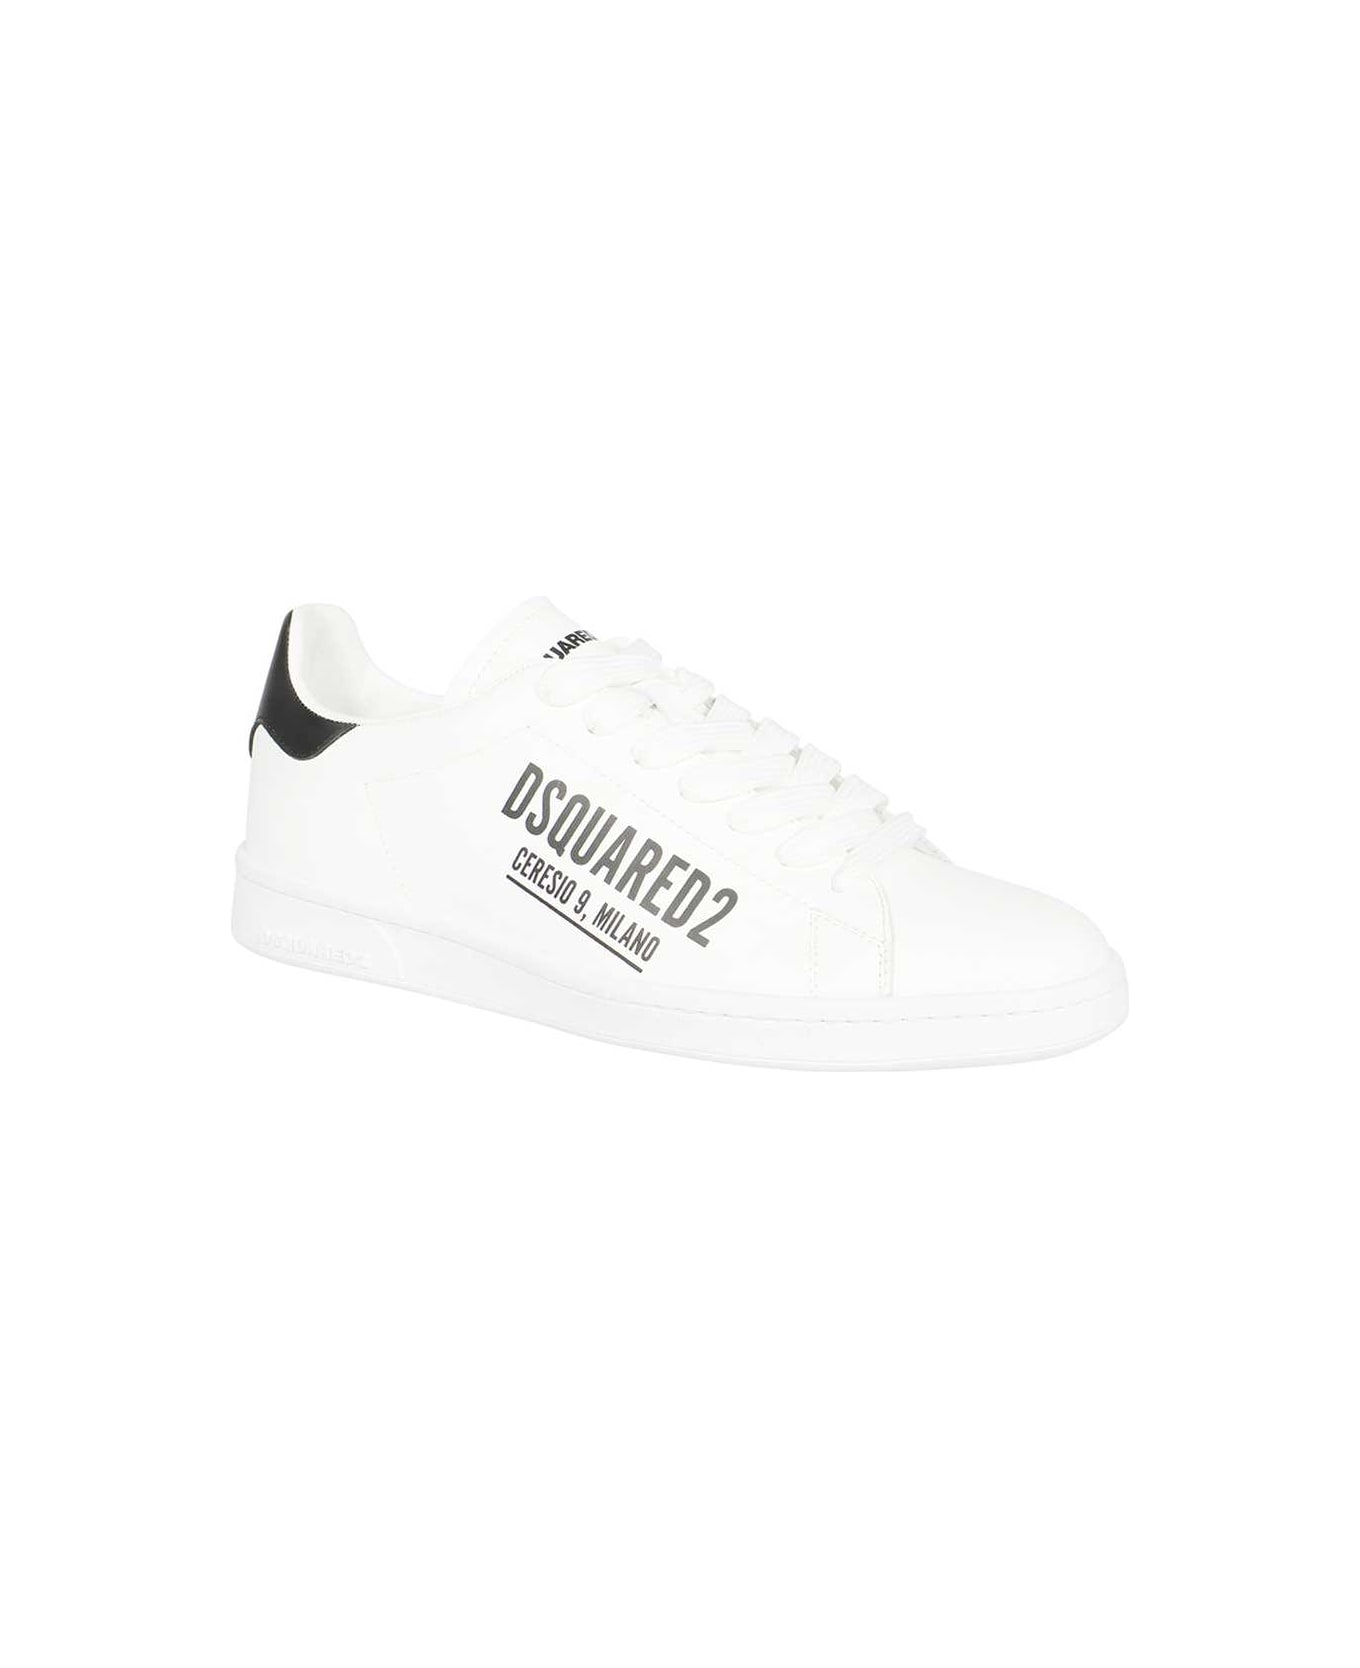 Dsquared2 Bumper Low-top Sneakers - White